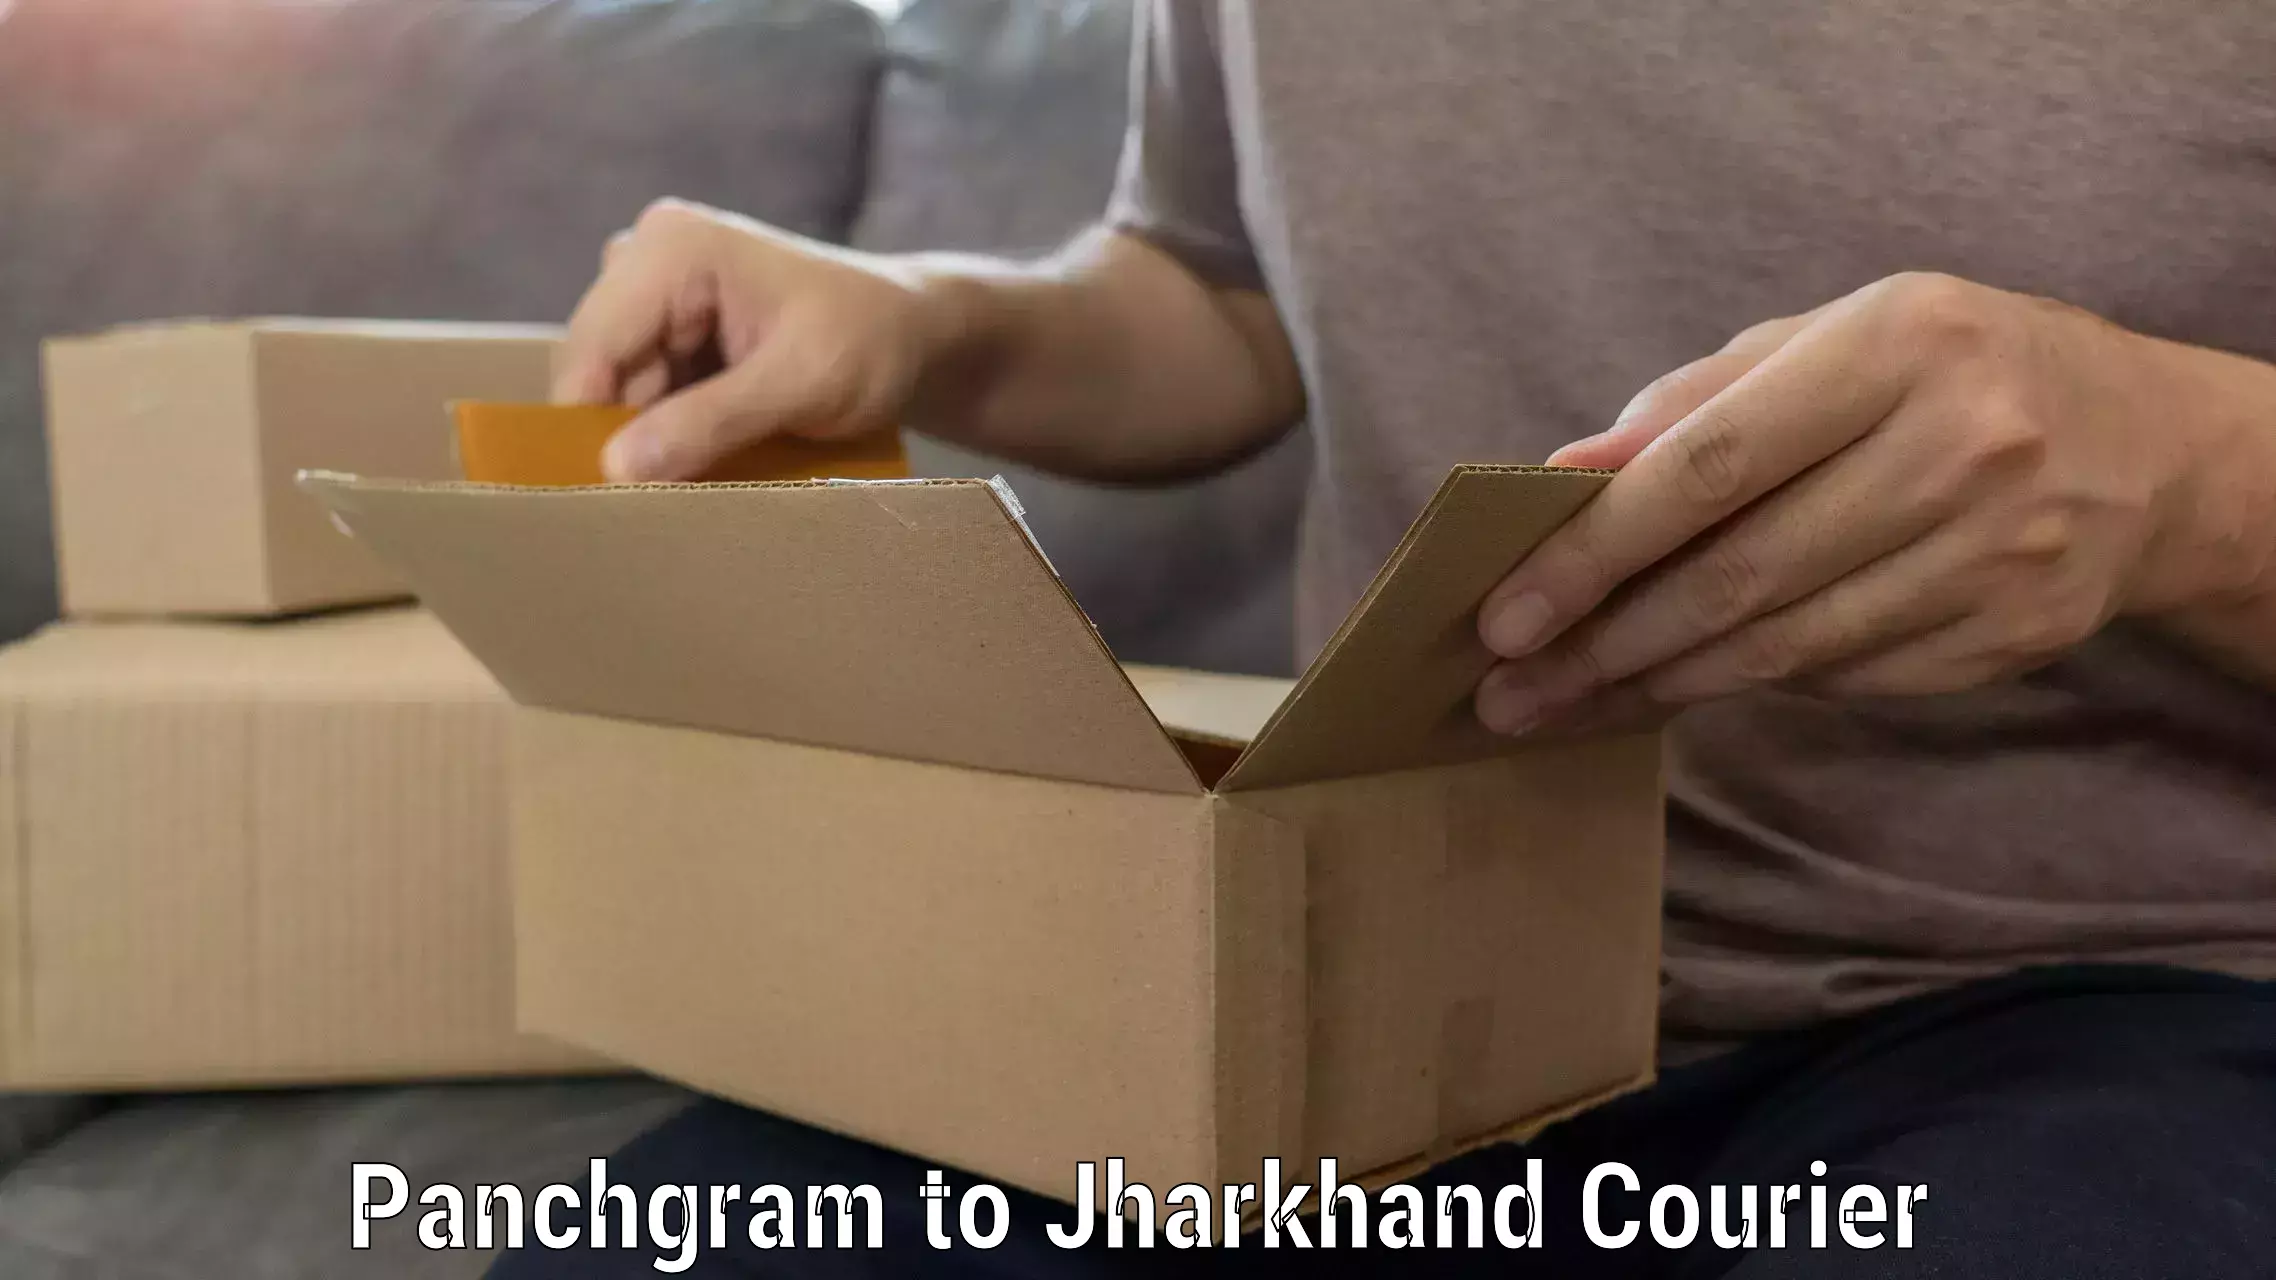 Professional moving company Panchgram to Jamshedpur